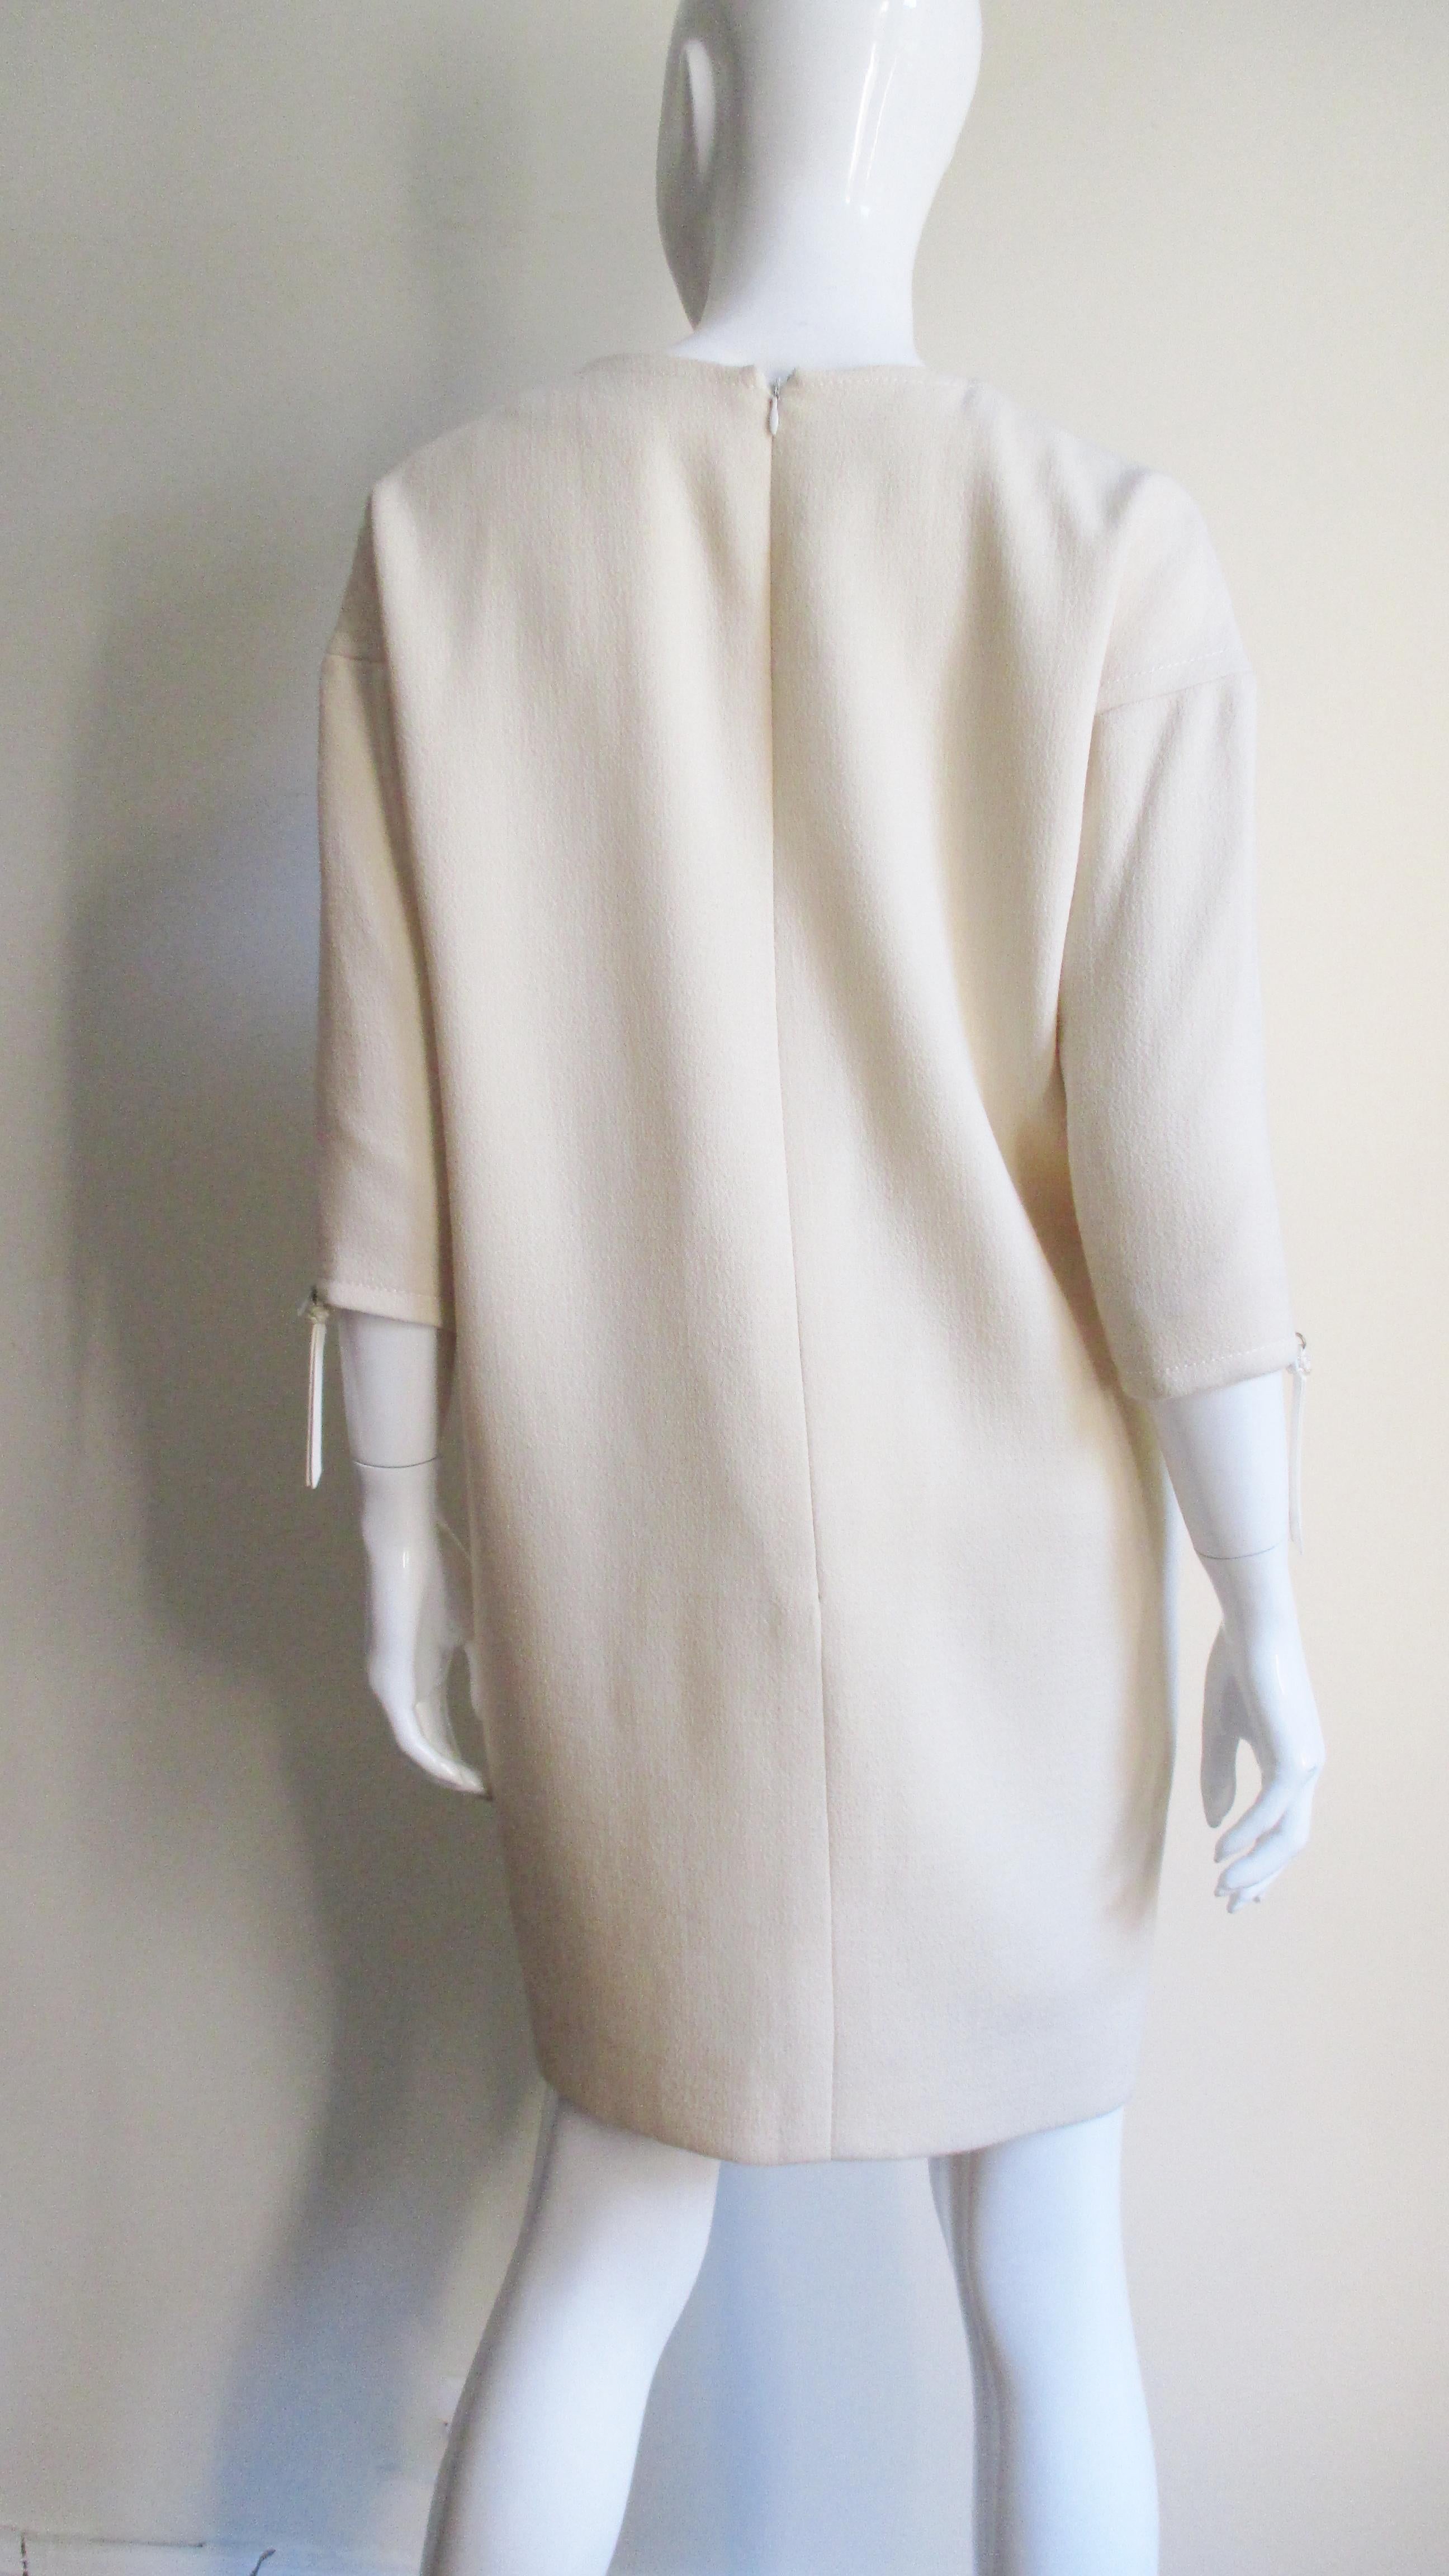  John Galliano for Christian Dior Dress 1990s For Sale 3